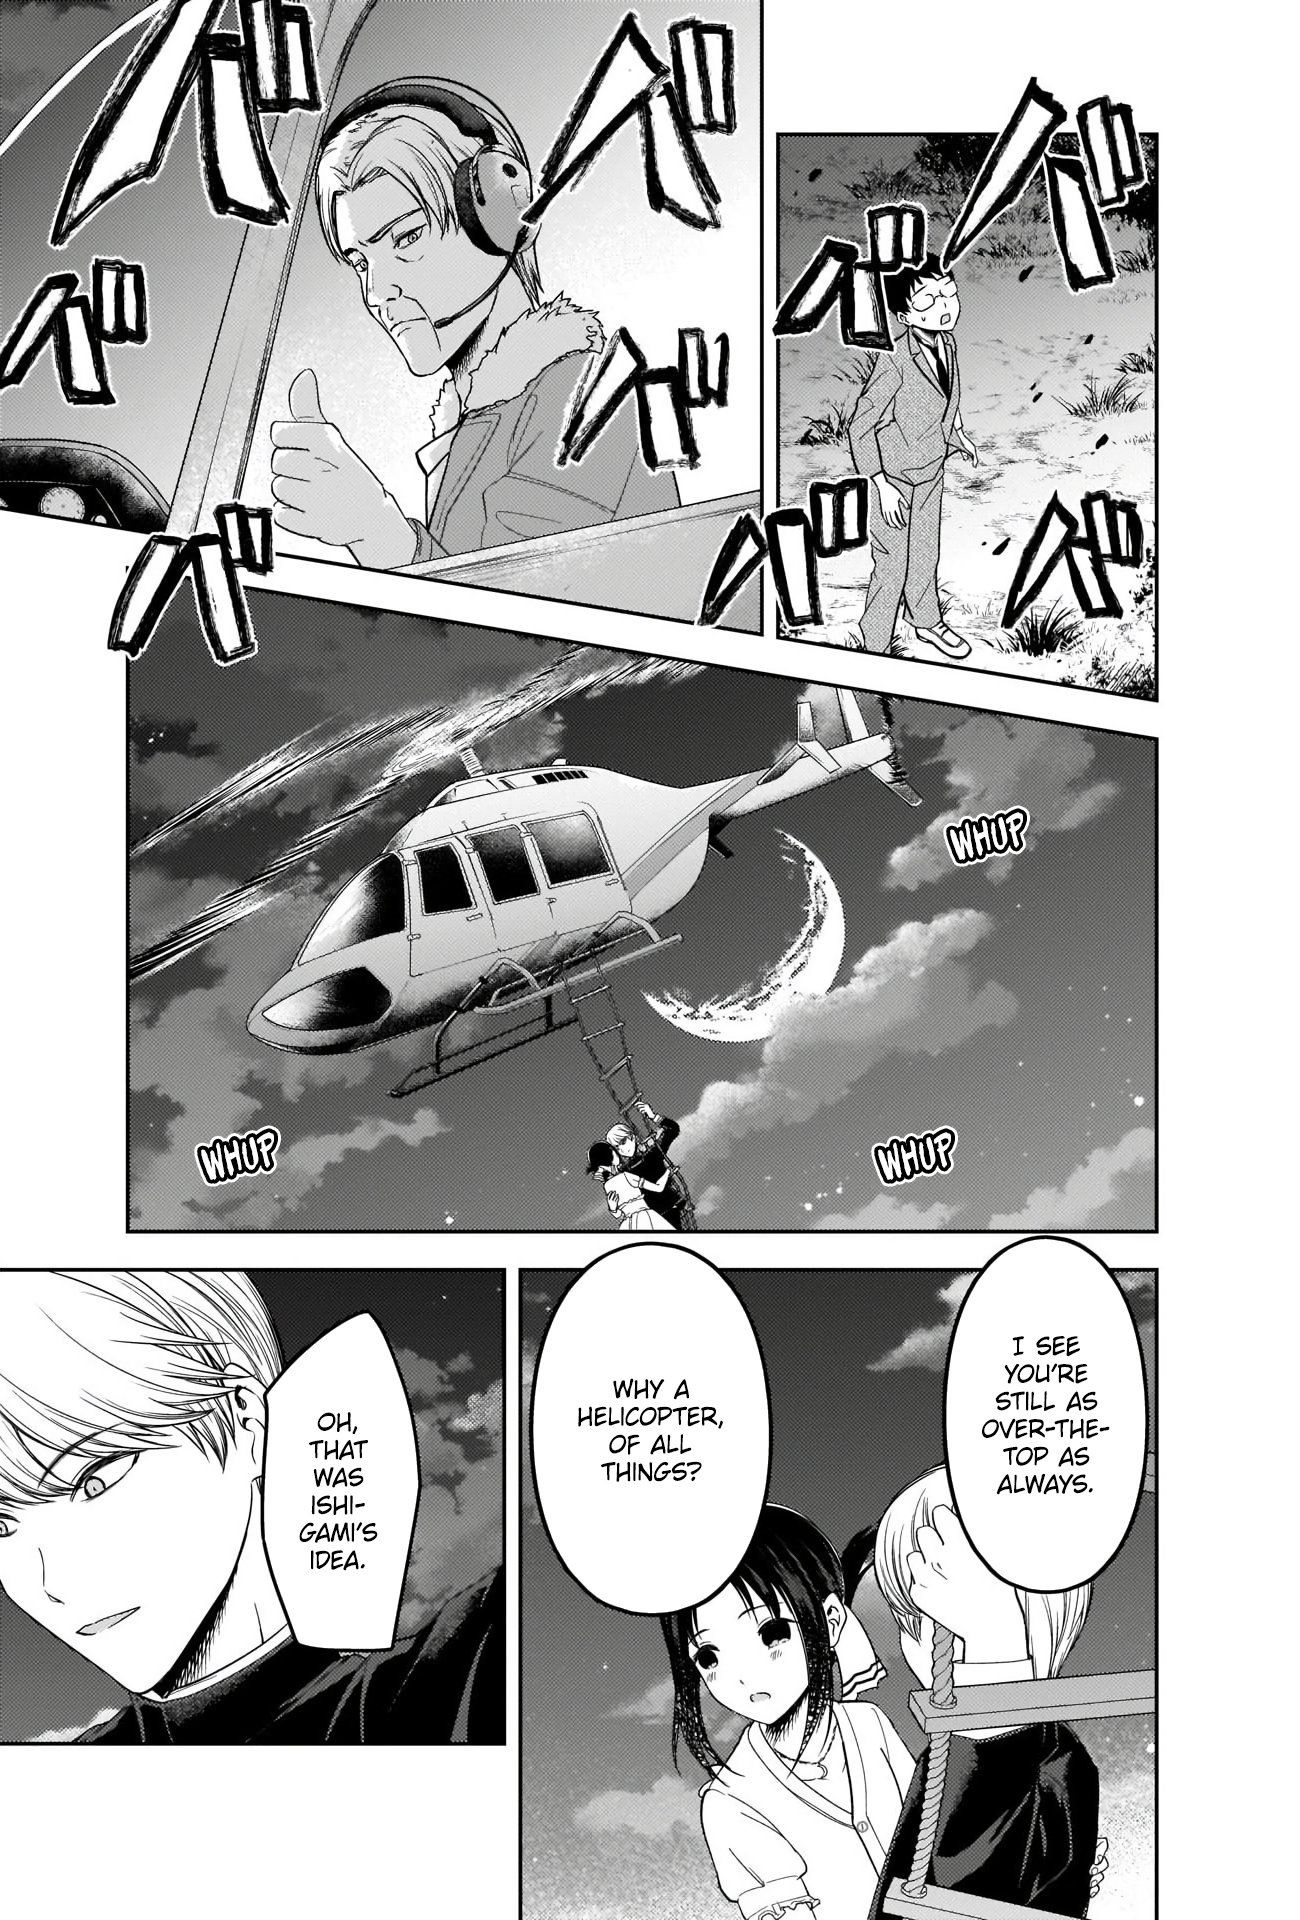 DISC] We Want to Talk About Kaguya Chapter 175 : r/manga